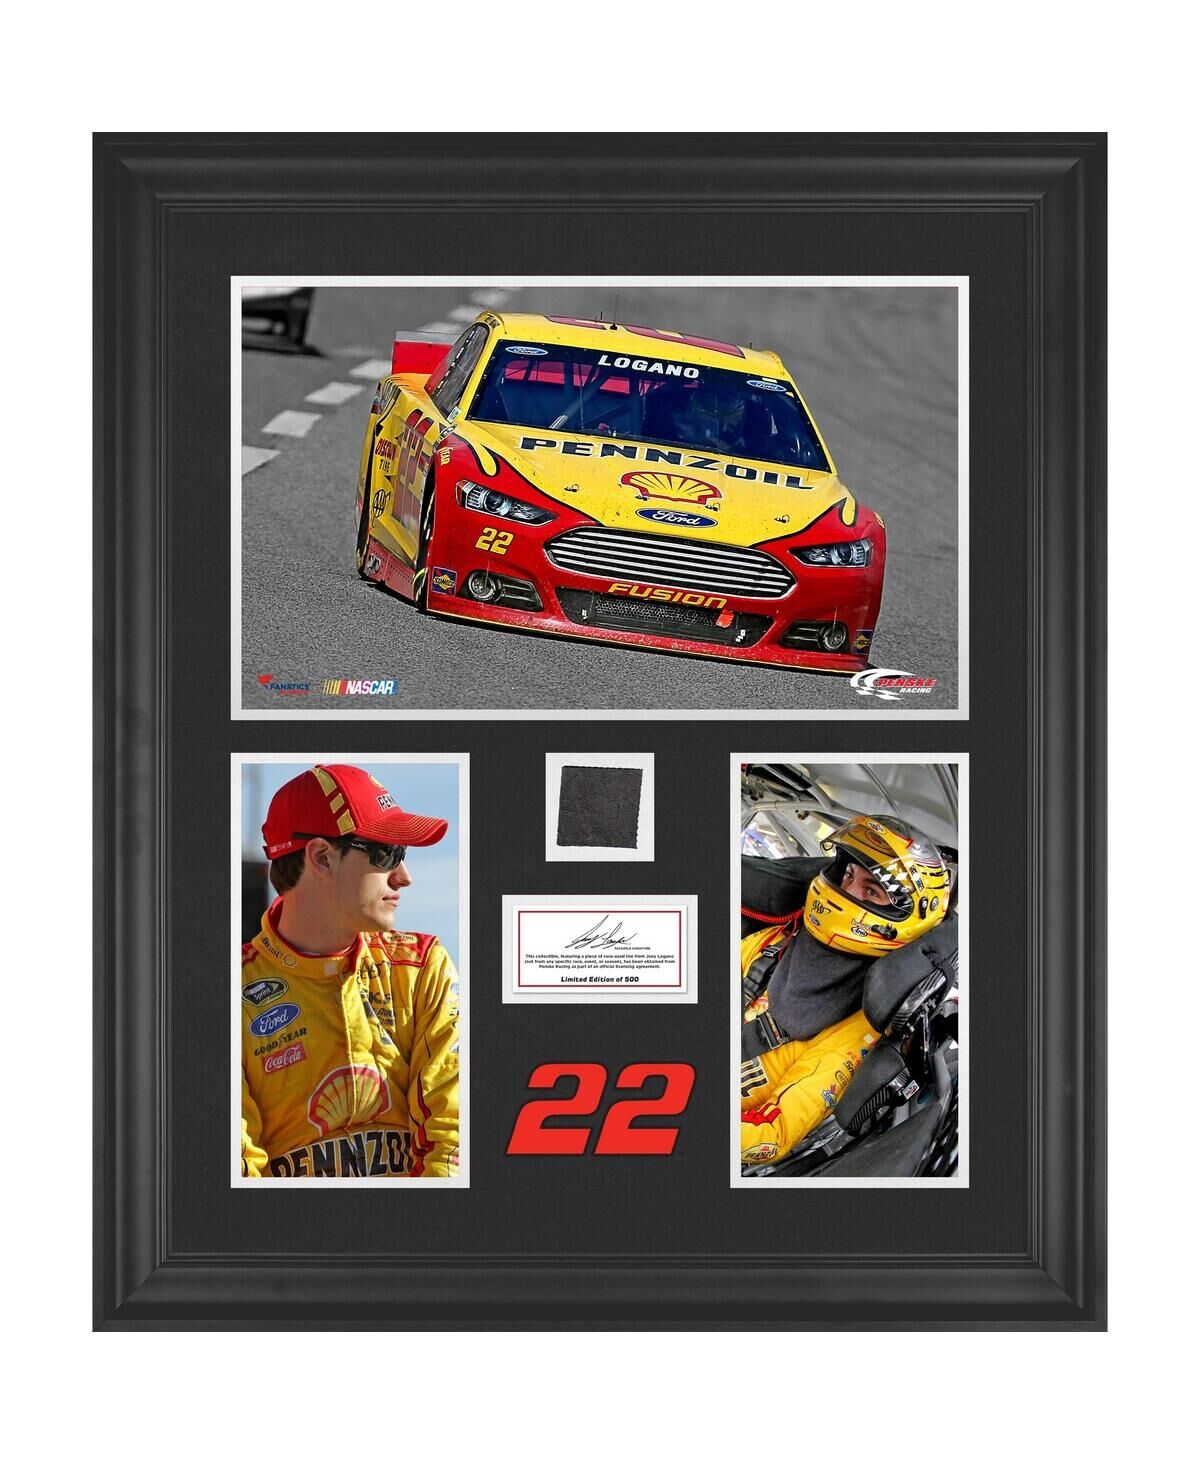 Fanatics Joey Logano Framed 3-Photograph Collage with Race-Used Tire-Limited Edition of 500 - Multi